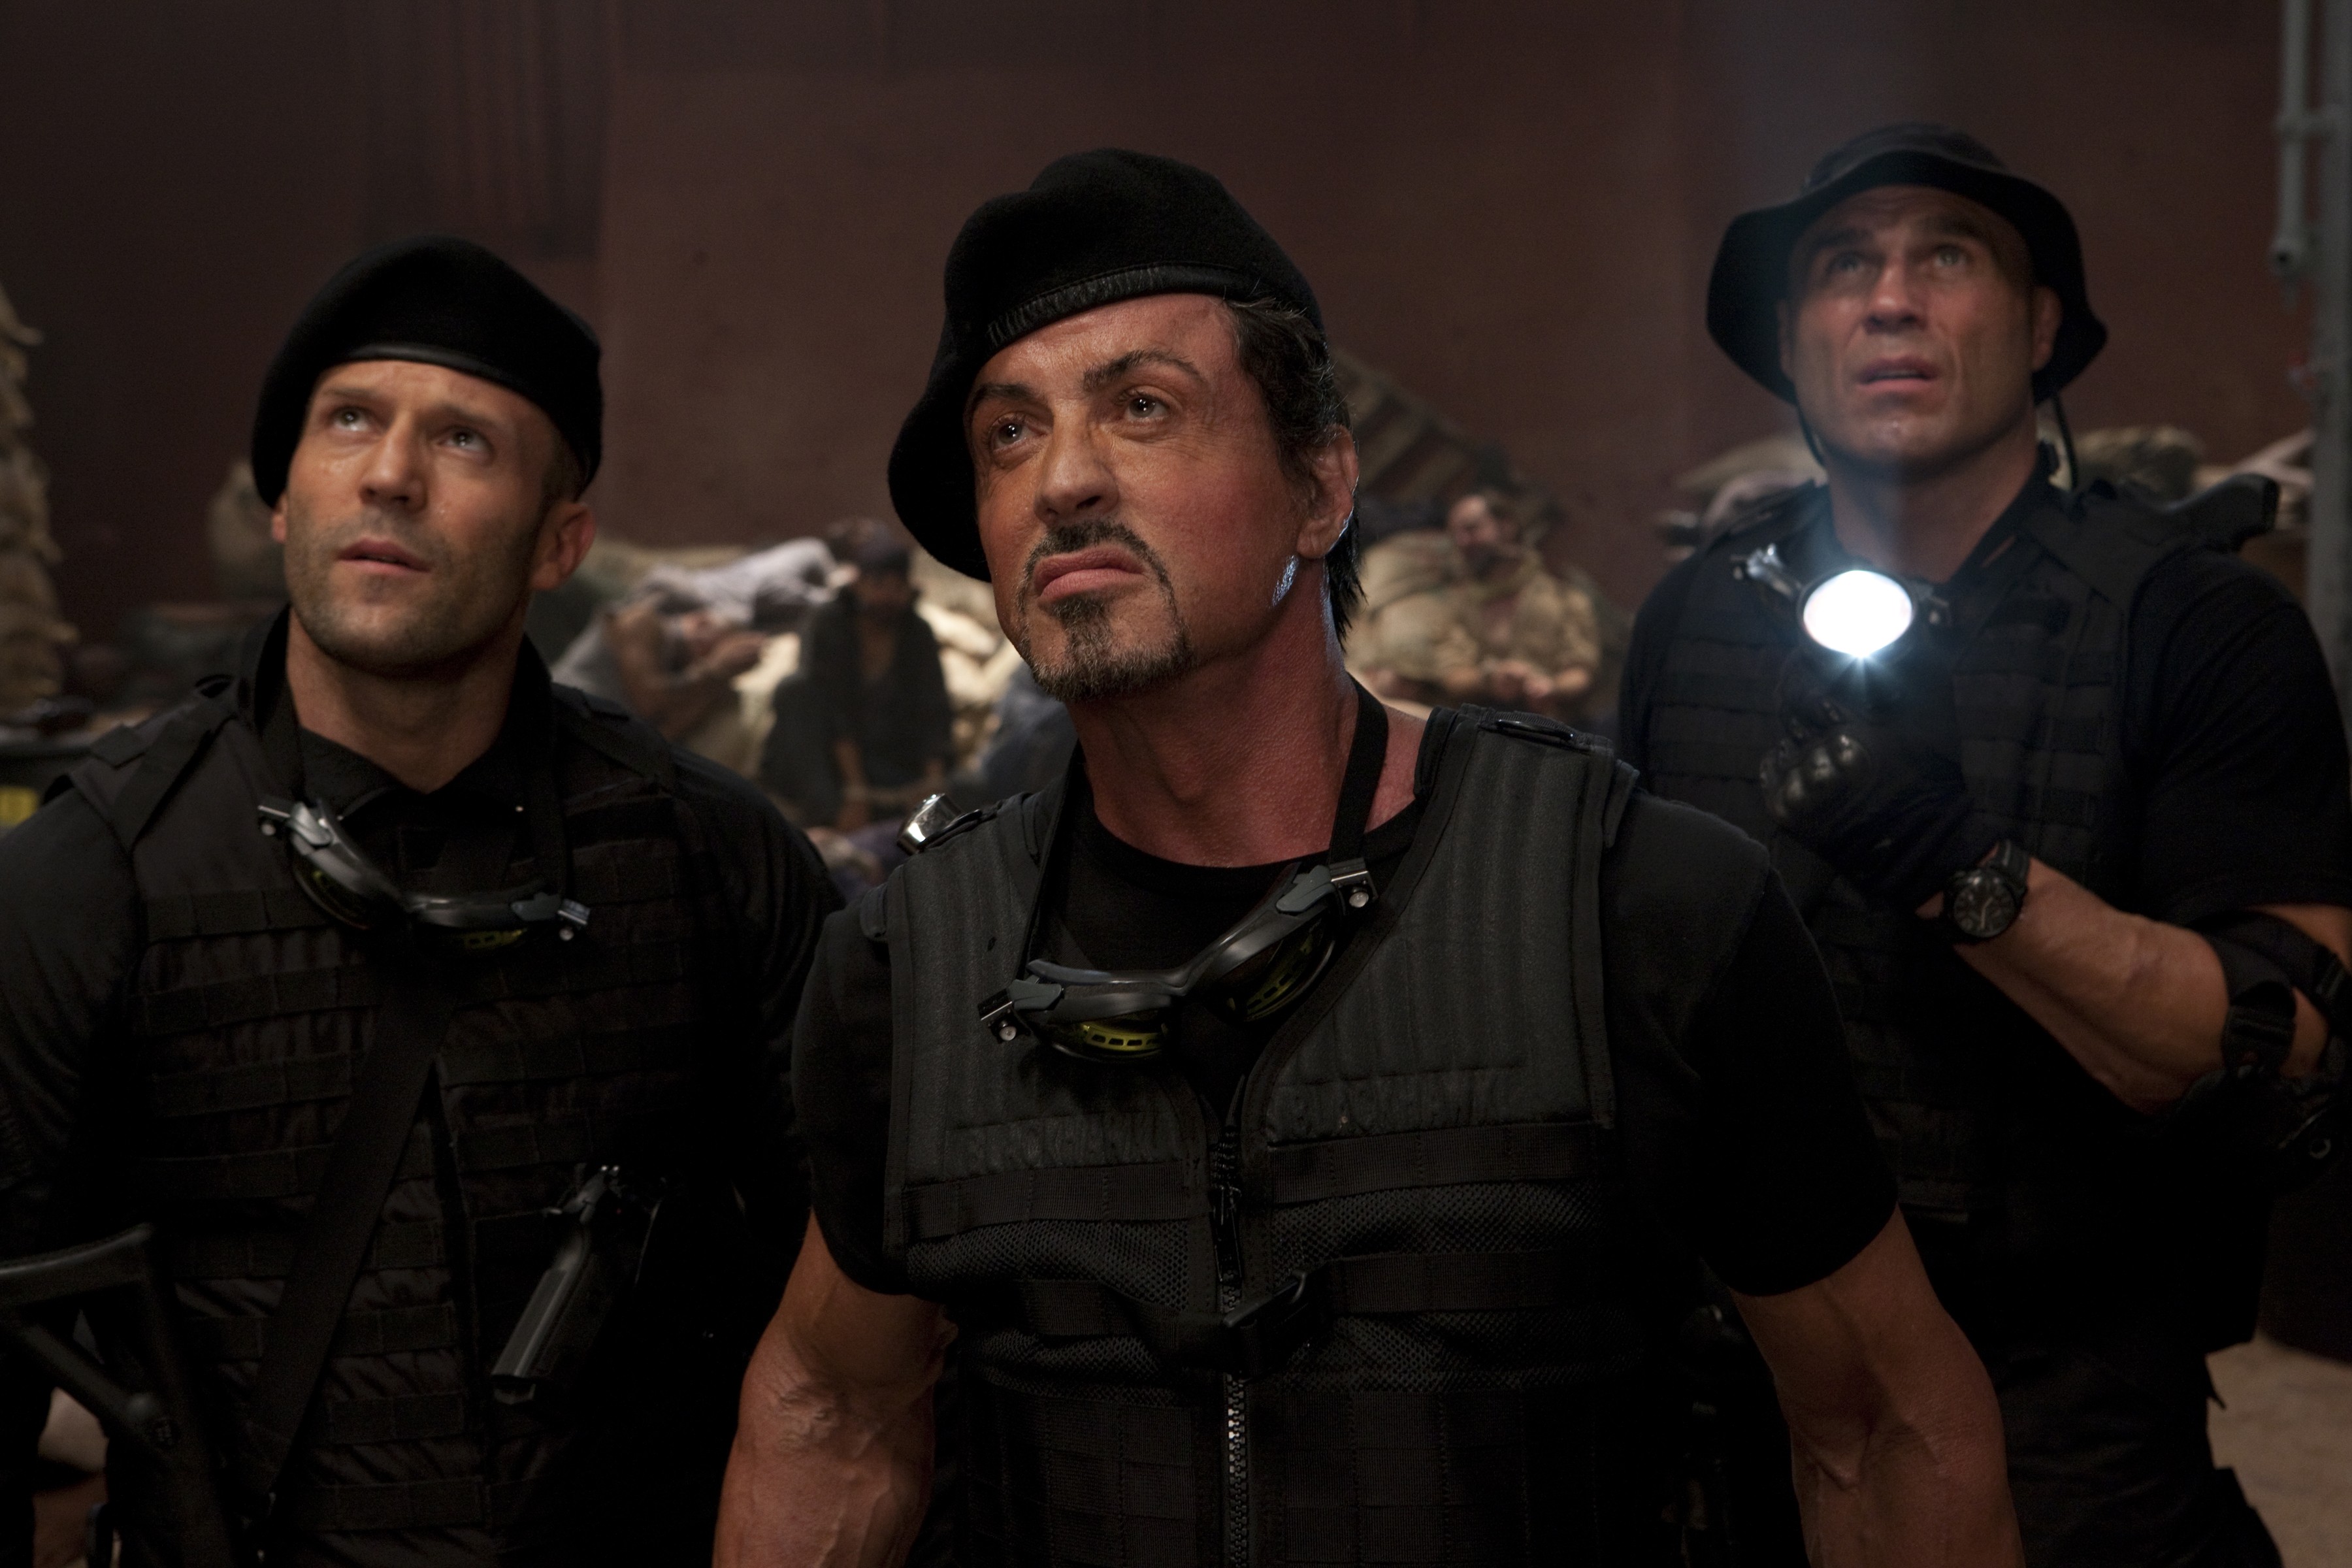 The Expendables, Dolph Lundgren, Sylvester Stallone, Randy Couture, UFC